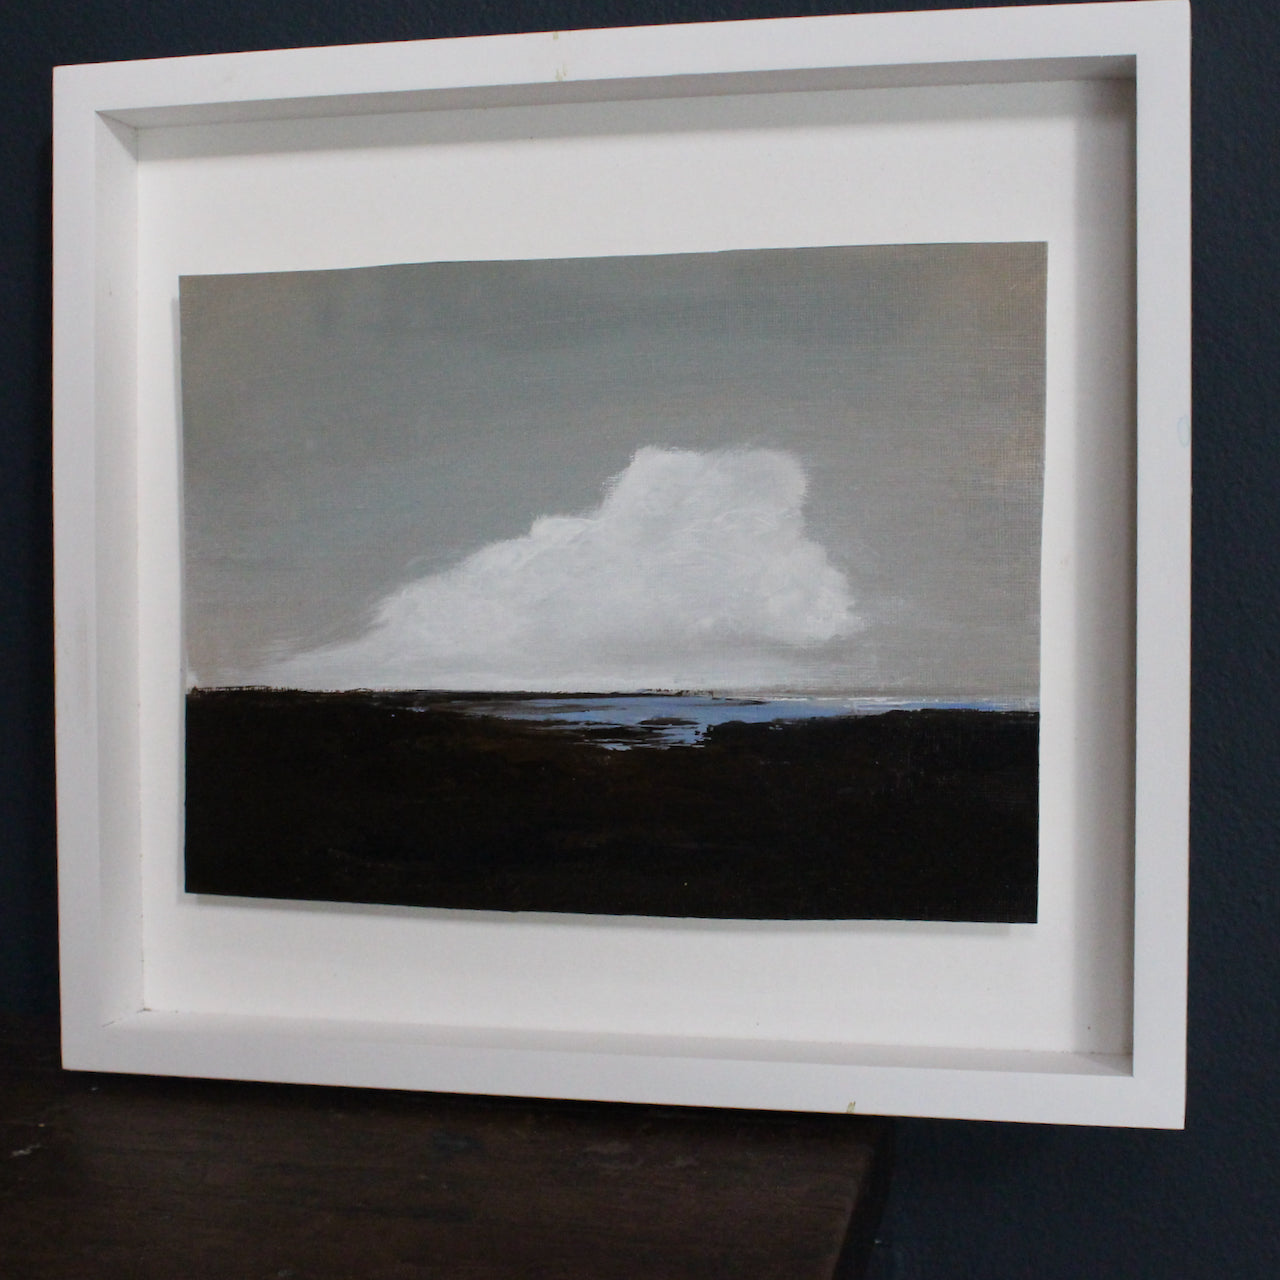 Cornish artist Nicola Mosley seascape of brown and black tones with turquoise ocean and white clouds